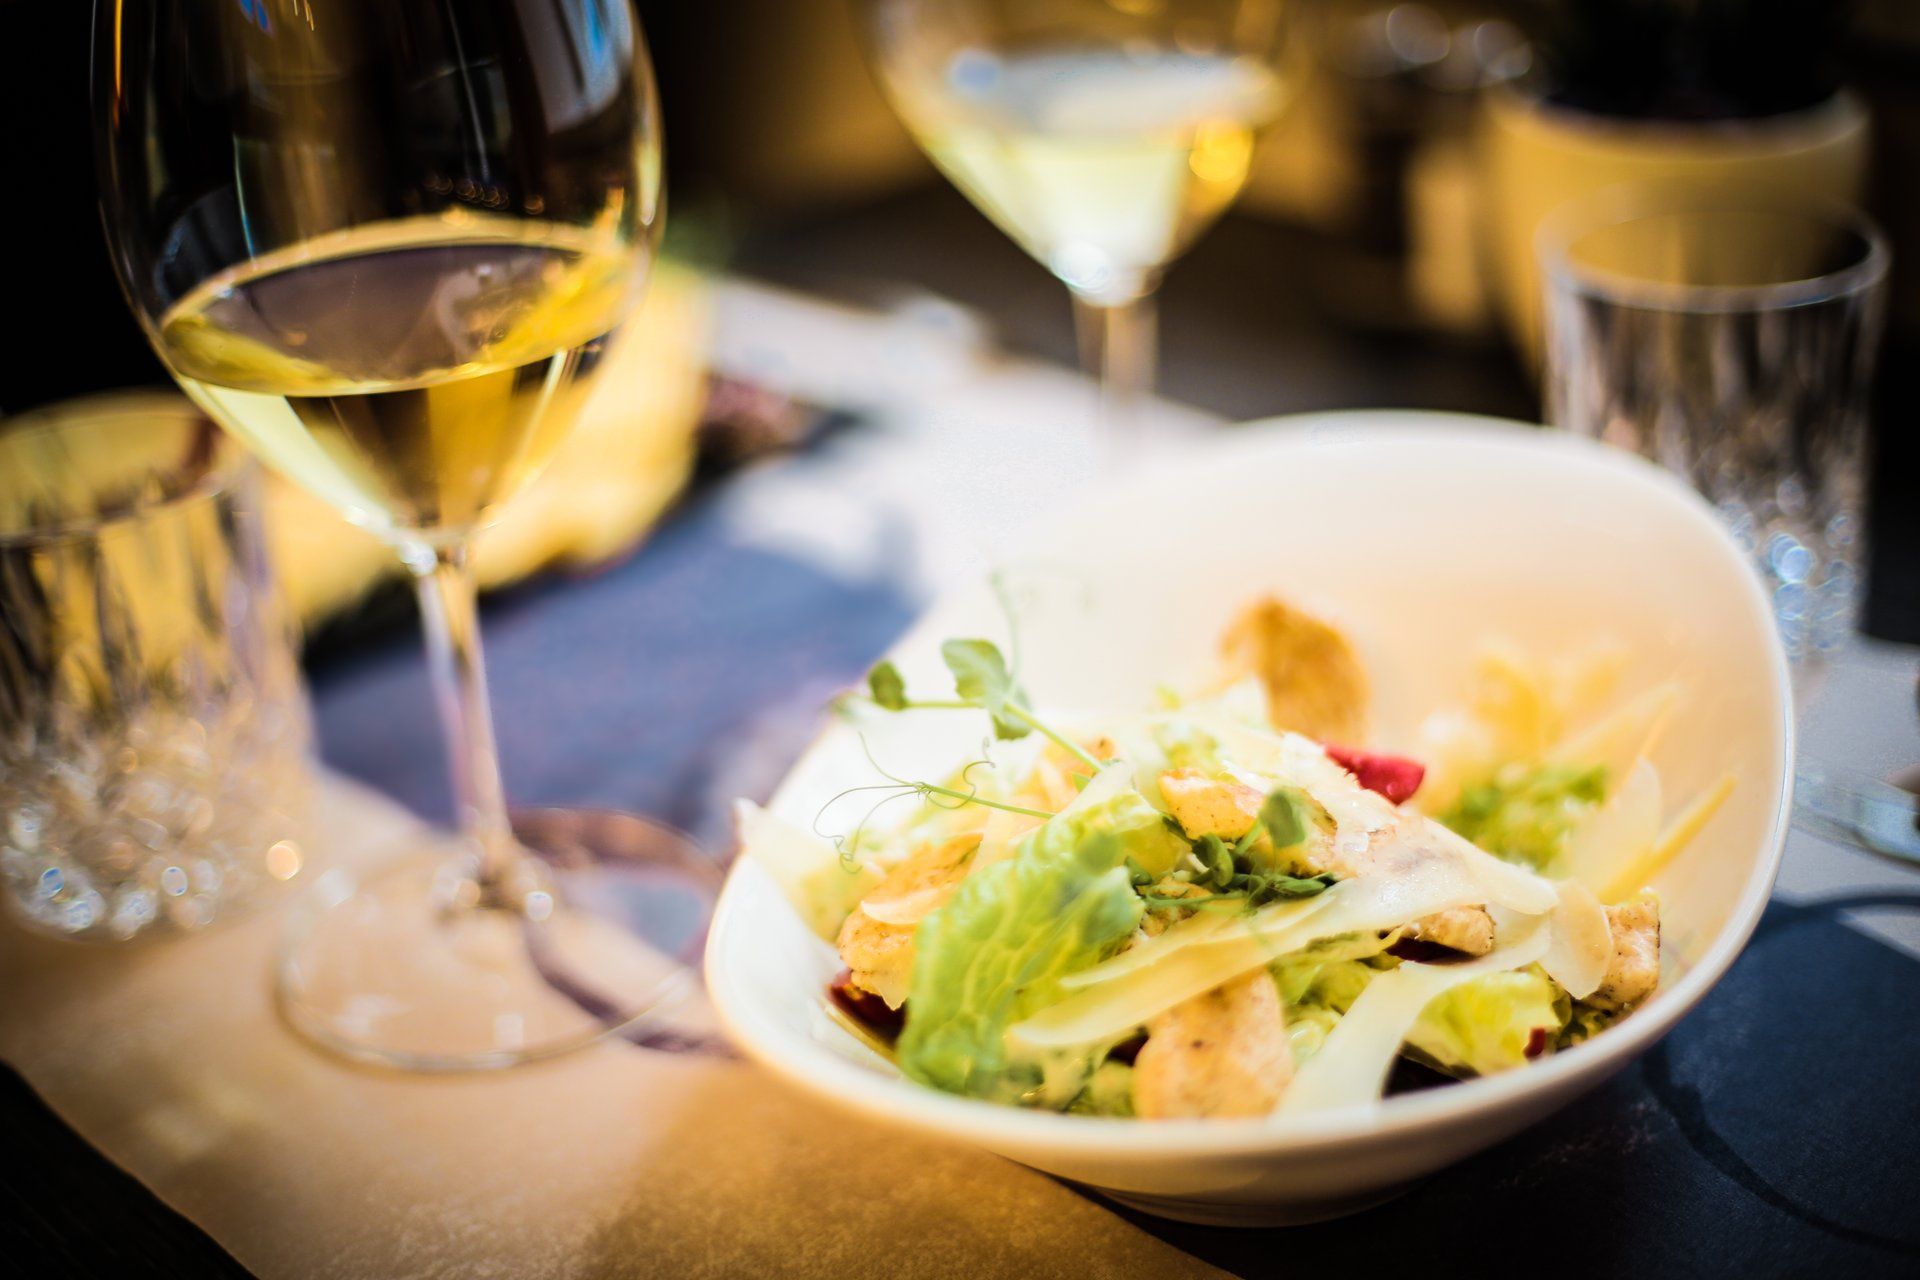 Fancy salad with white wine